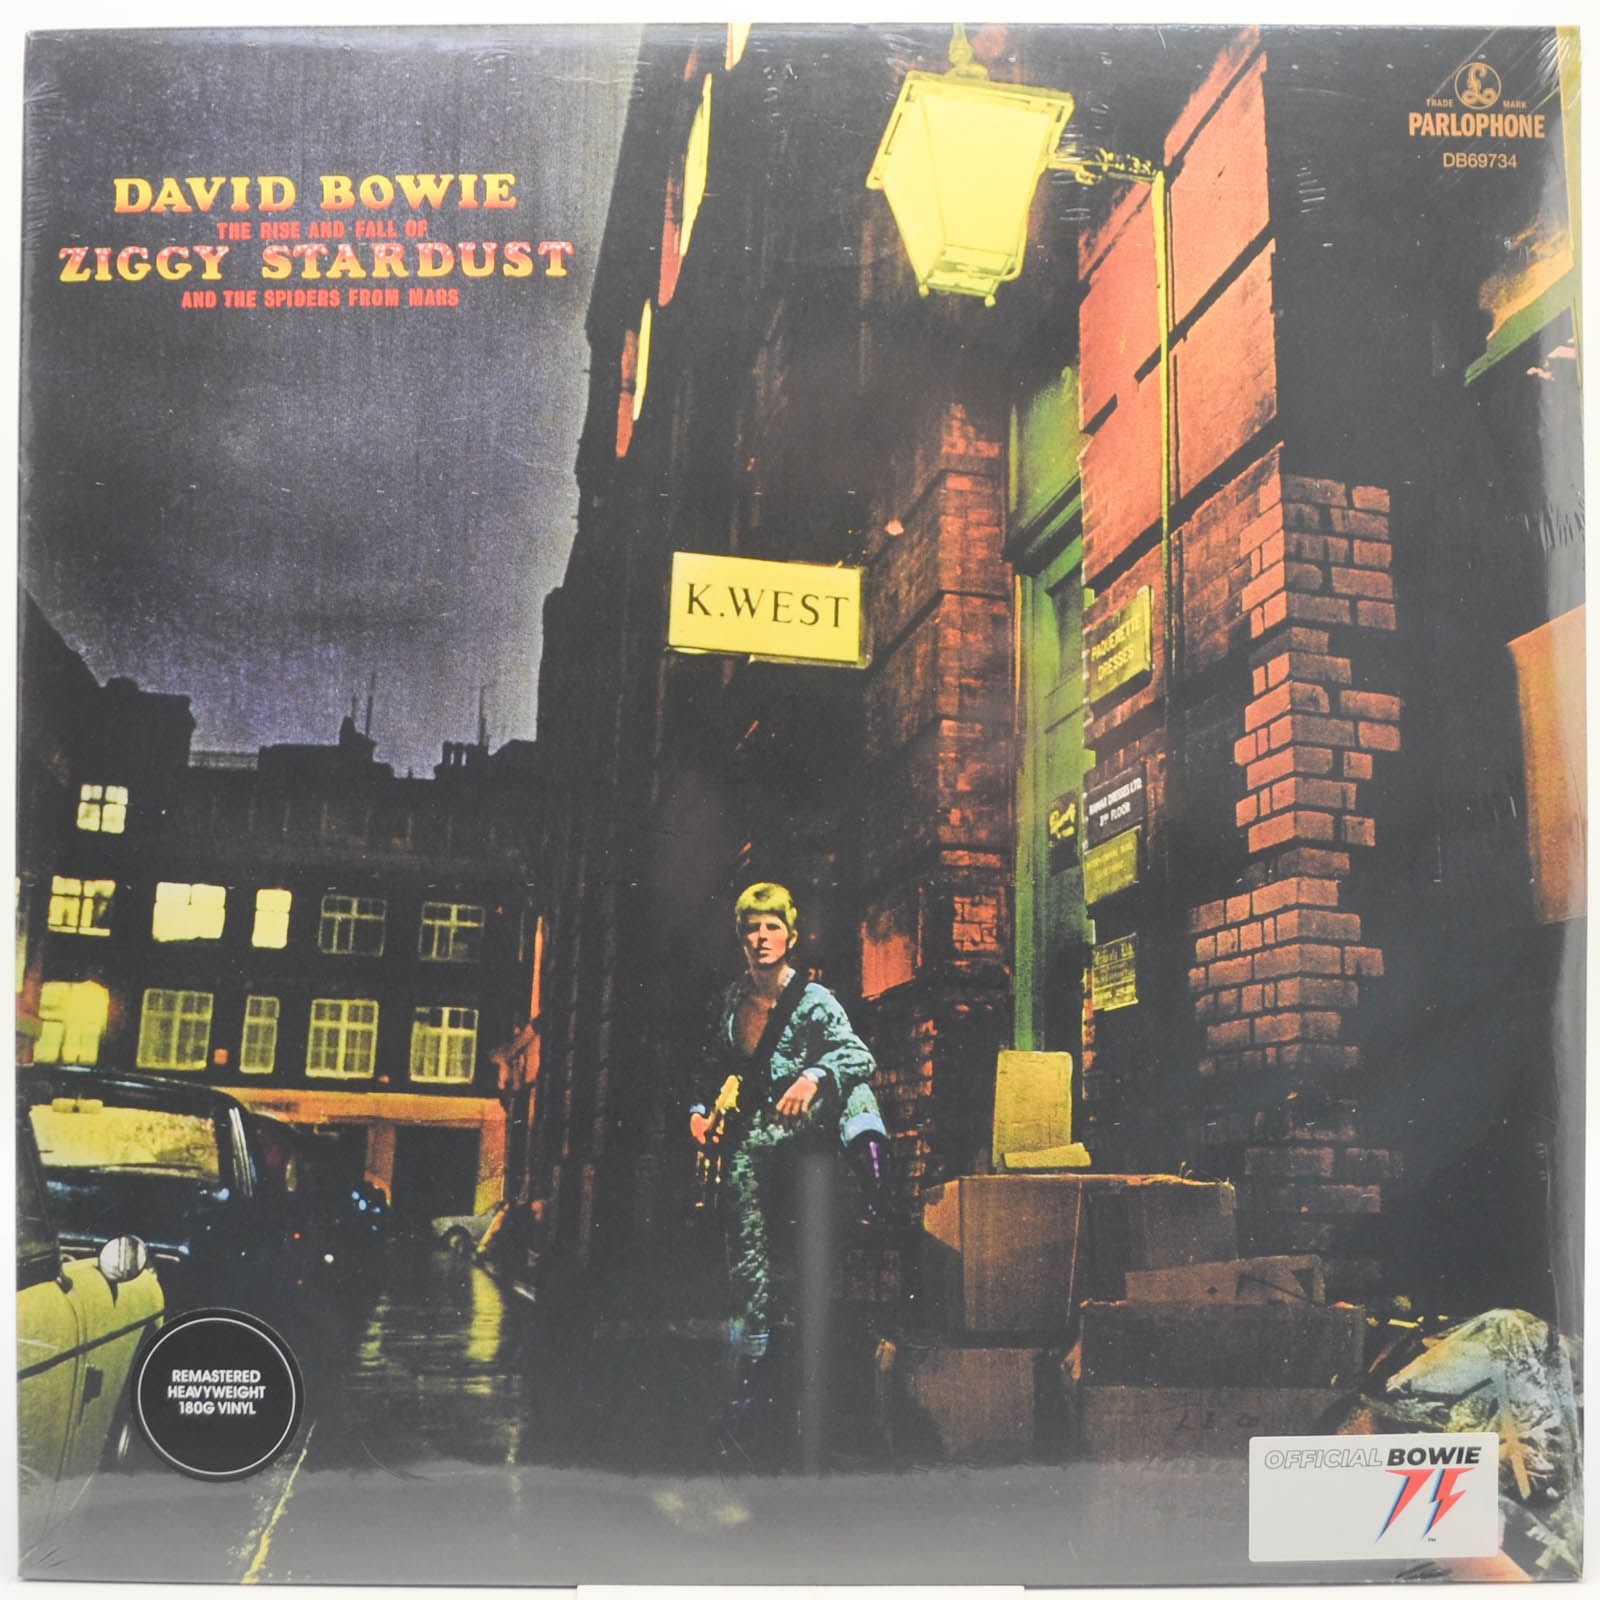 David Bowie — The Rise And Fall Of Ziggy Stardust And The Spiders From Mars, 1972